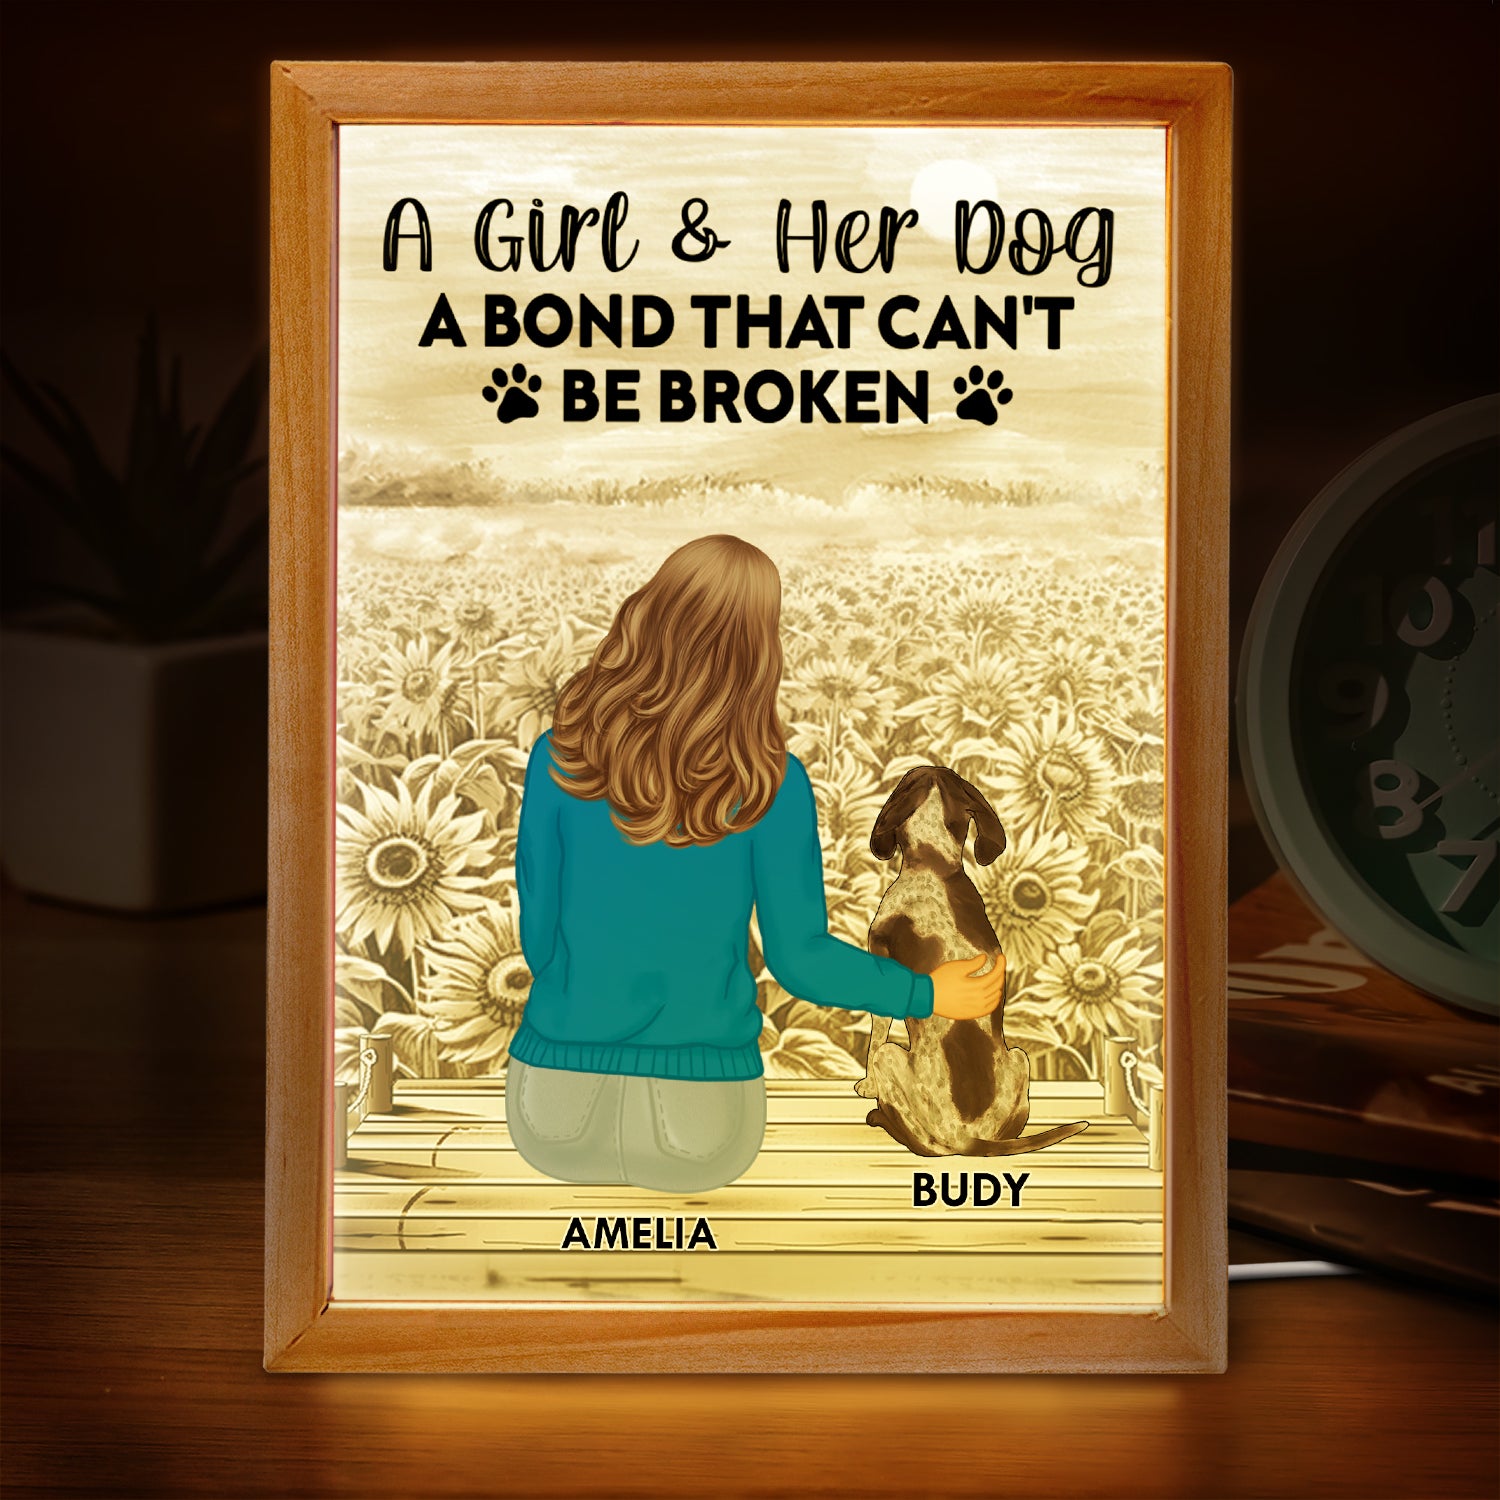 A Bond That Can't Be Broken - Gift For Dog Lovers, Dog Mom, Dog Dad - Personalized Picture Frame Light Box